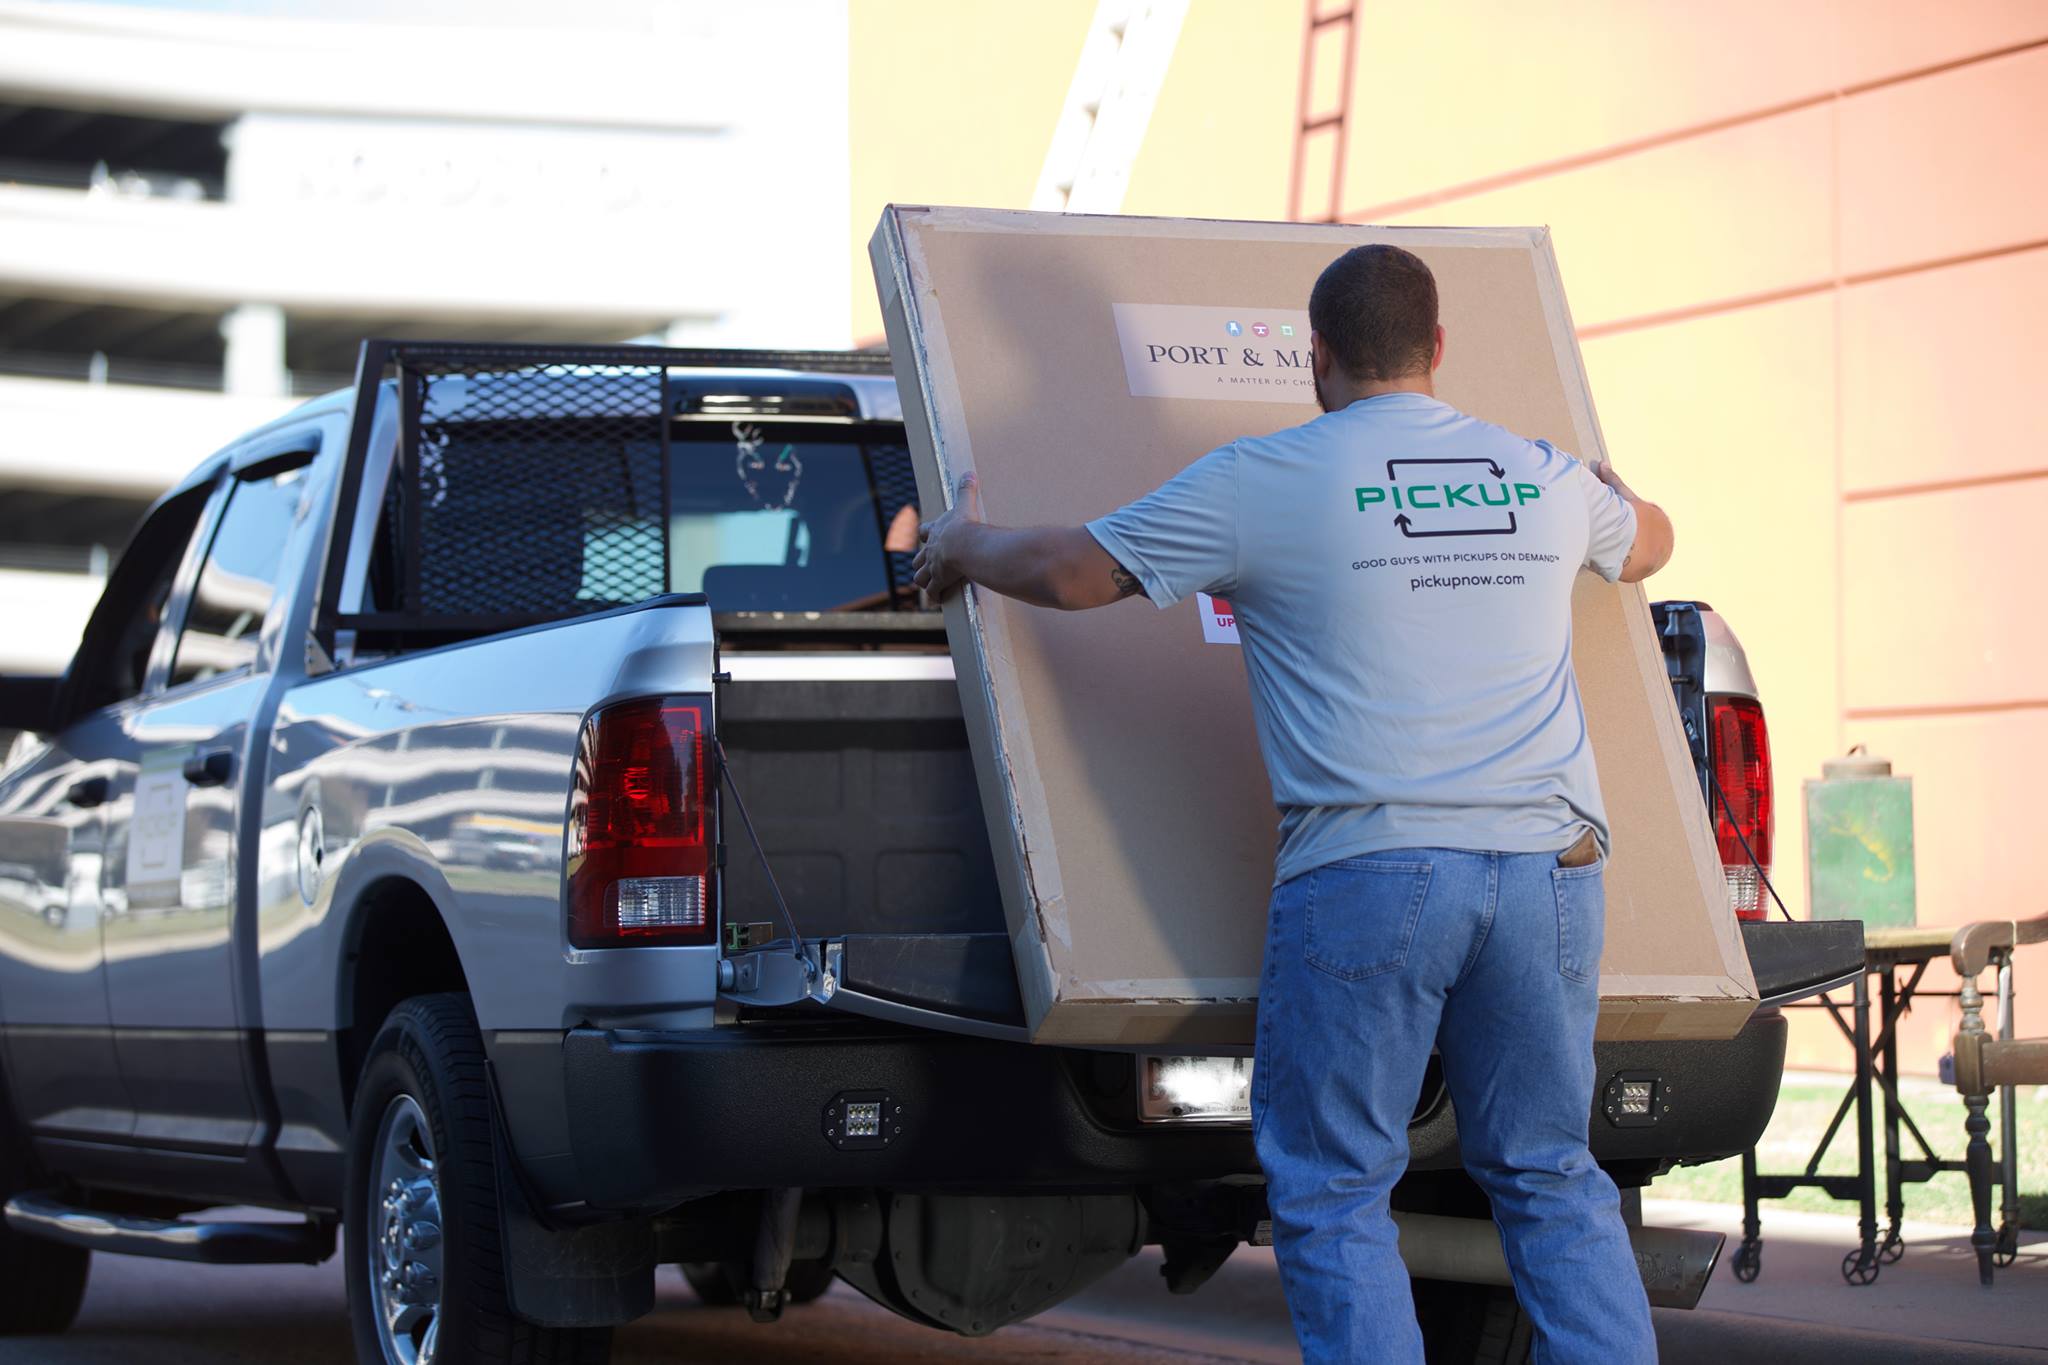 Need a pickup truck for moving? There's an app for that - Houston Chronicle